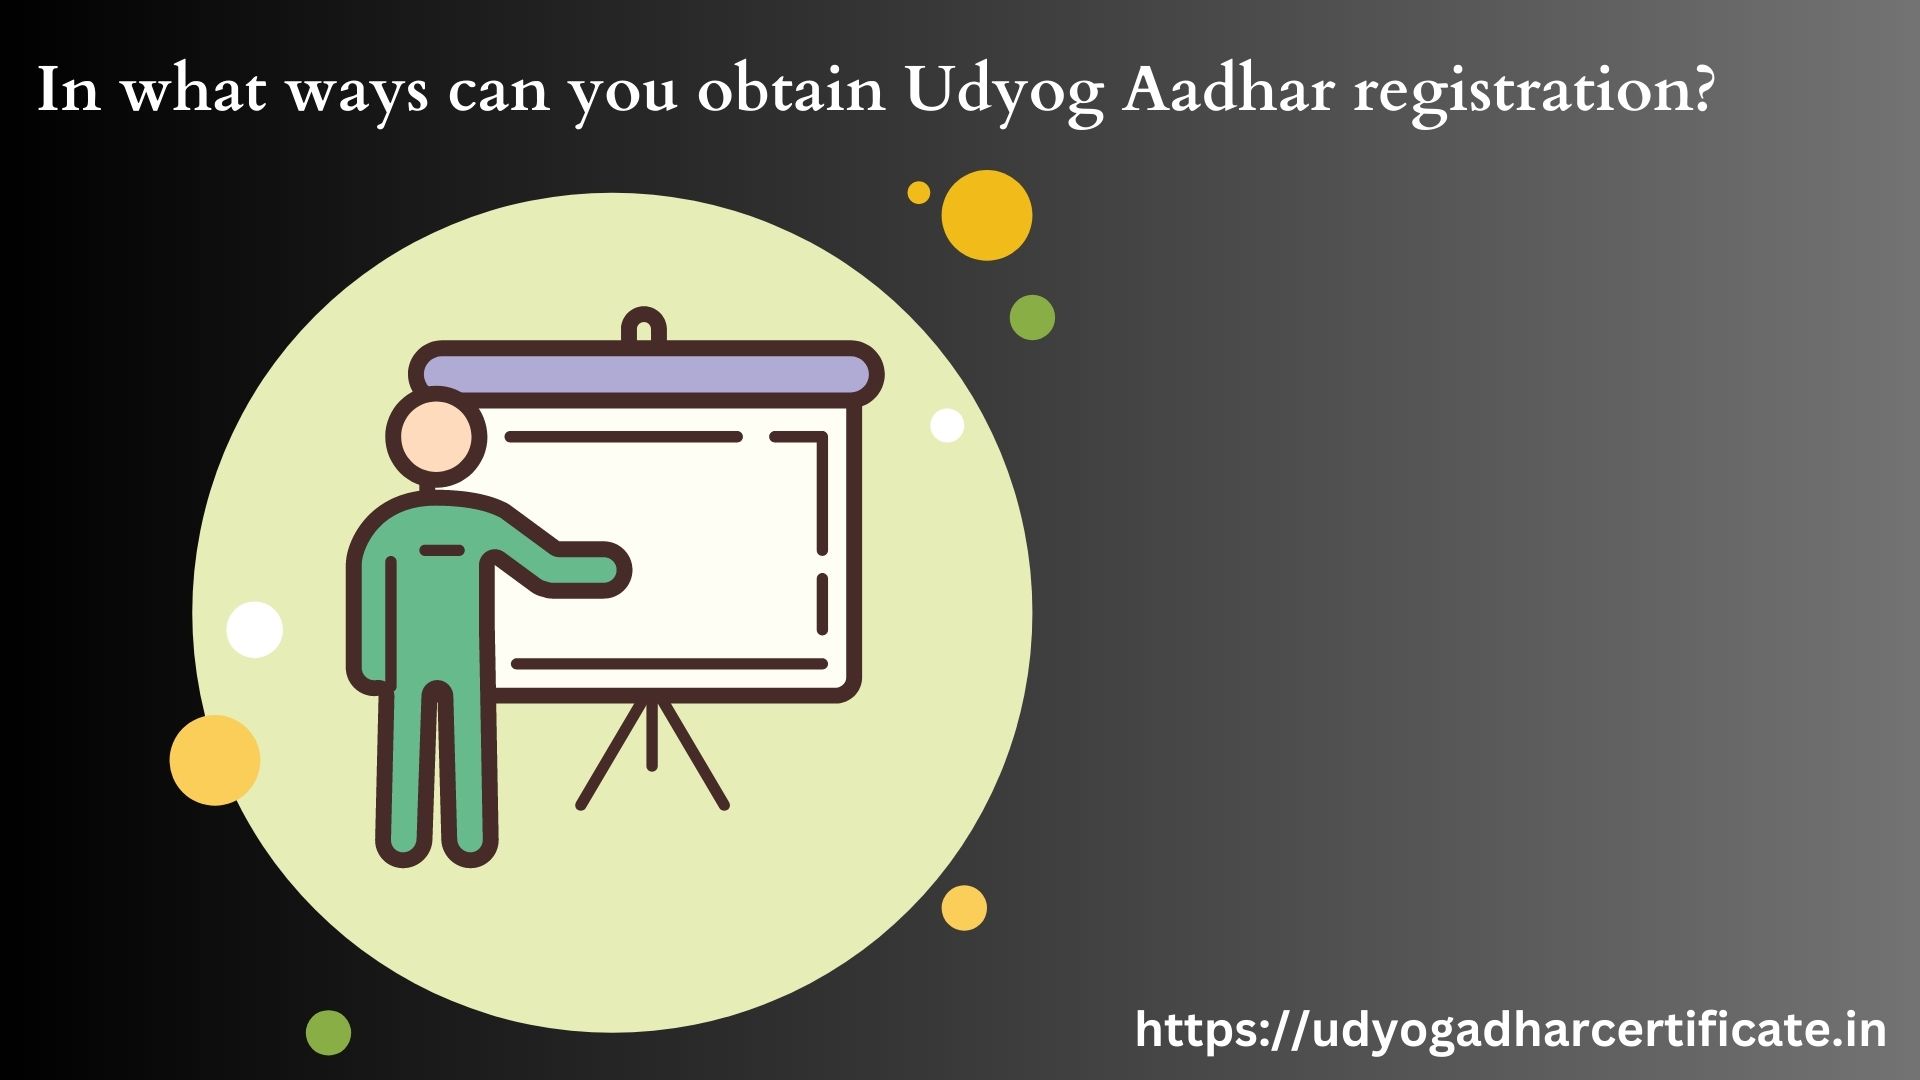 In what ways can you obtain Udyog Aadhar registration